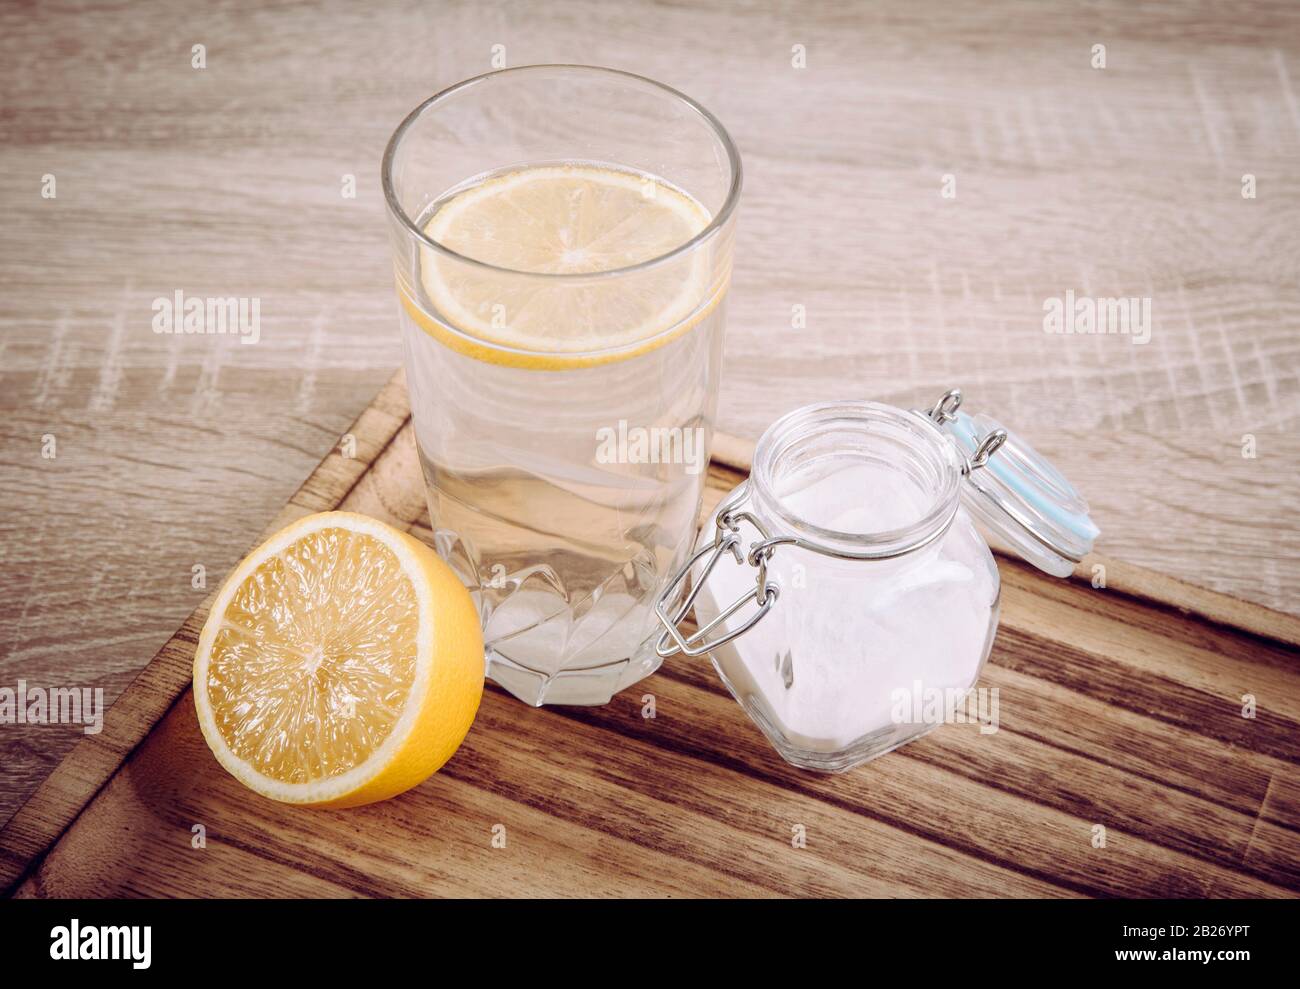 Baking soda in drinking glass with water and lemon juice, health benefits for digestive system concept on natural wooden background. Stock Photo